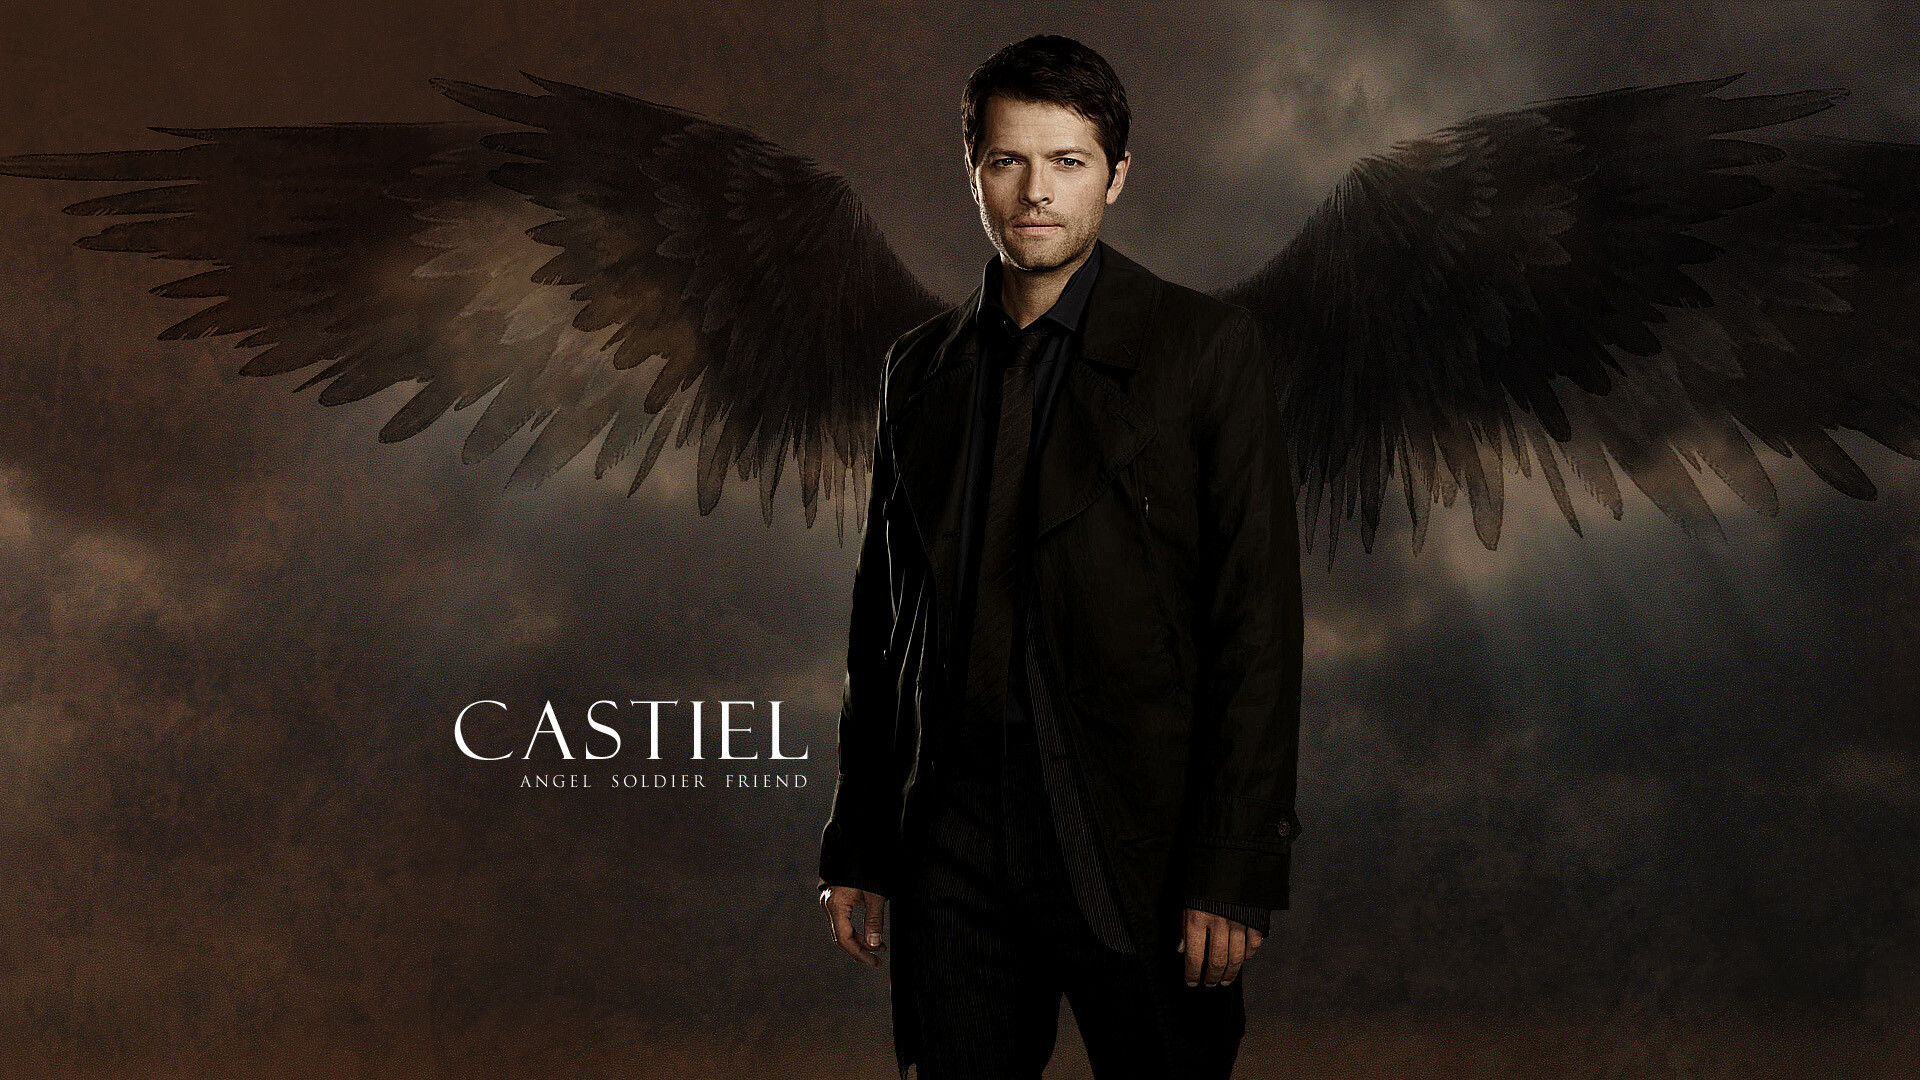 Supernatural: Castiel, Possesses a number of supernatural abilities, including the ability to kill demons. 1920x1080 Full HD Background.